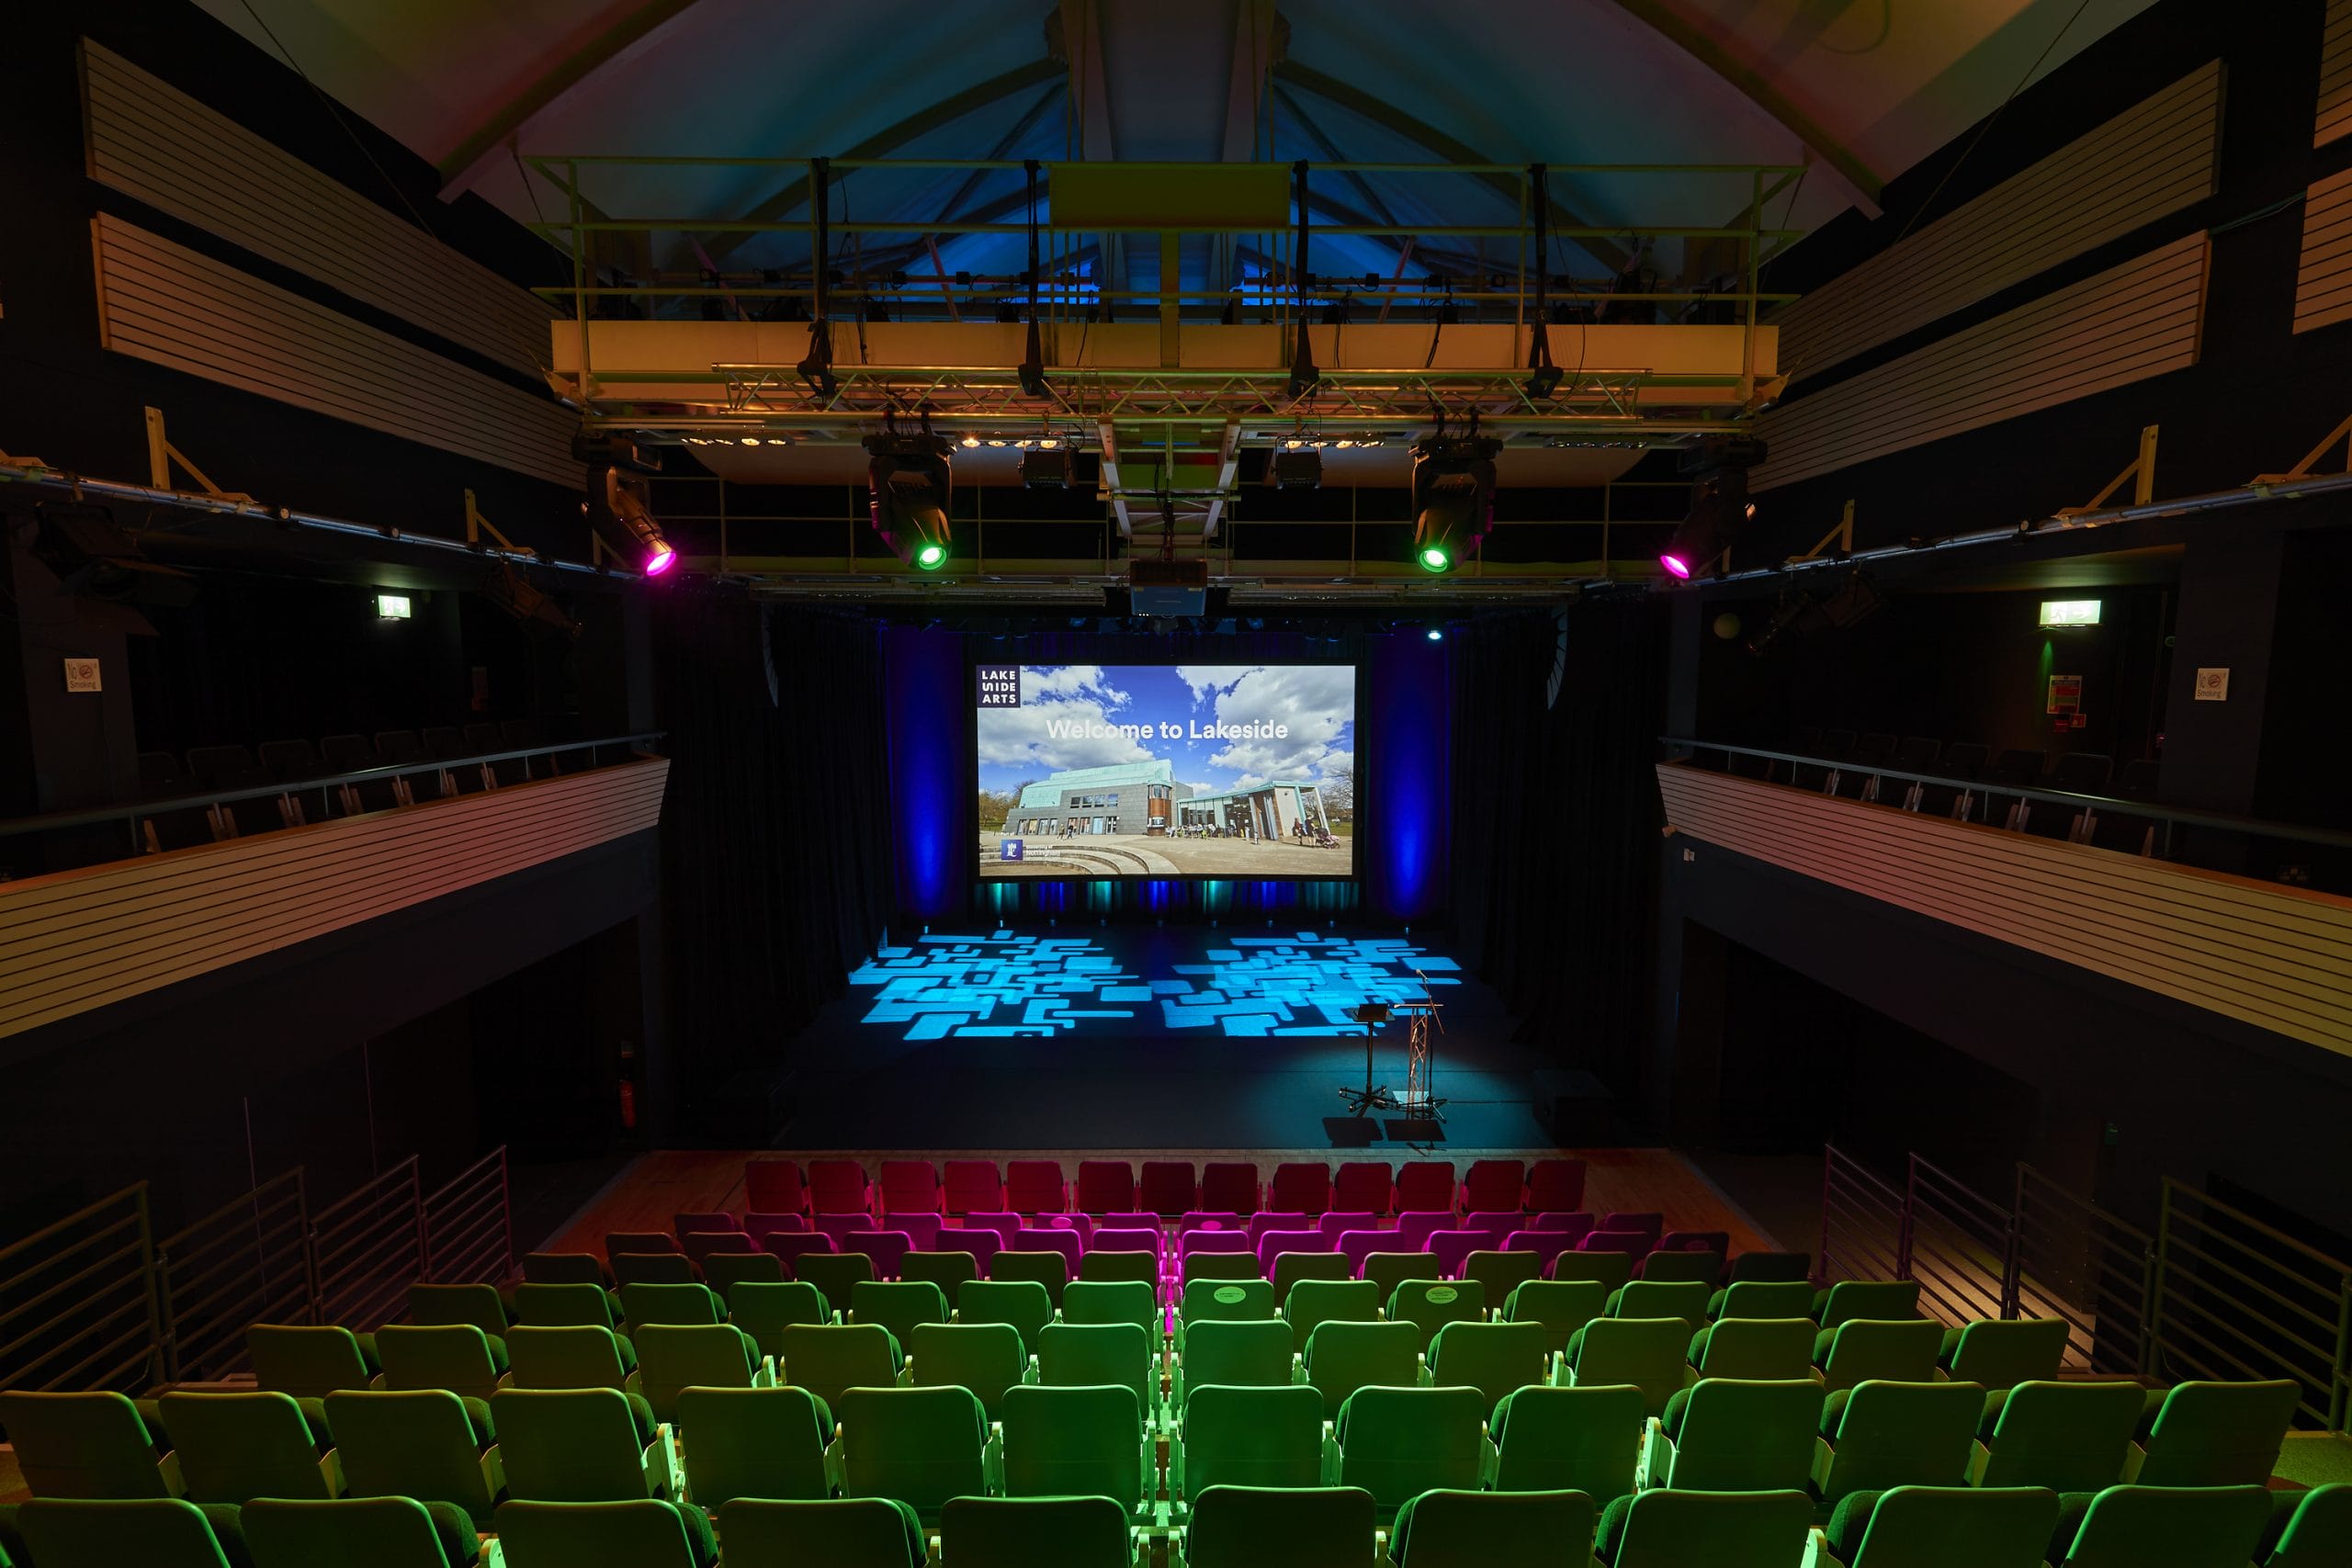 A theatre with 200 seats looking at a large screen